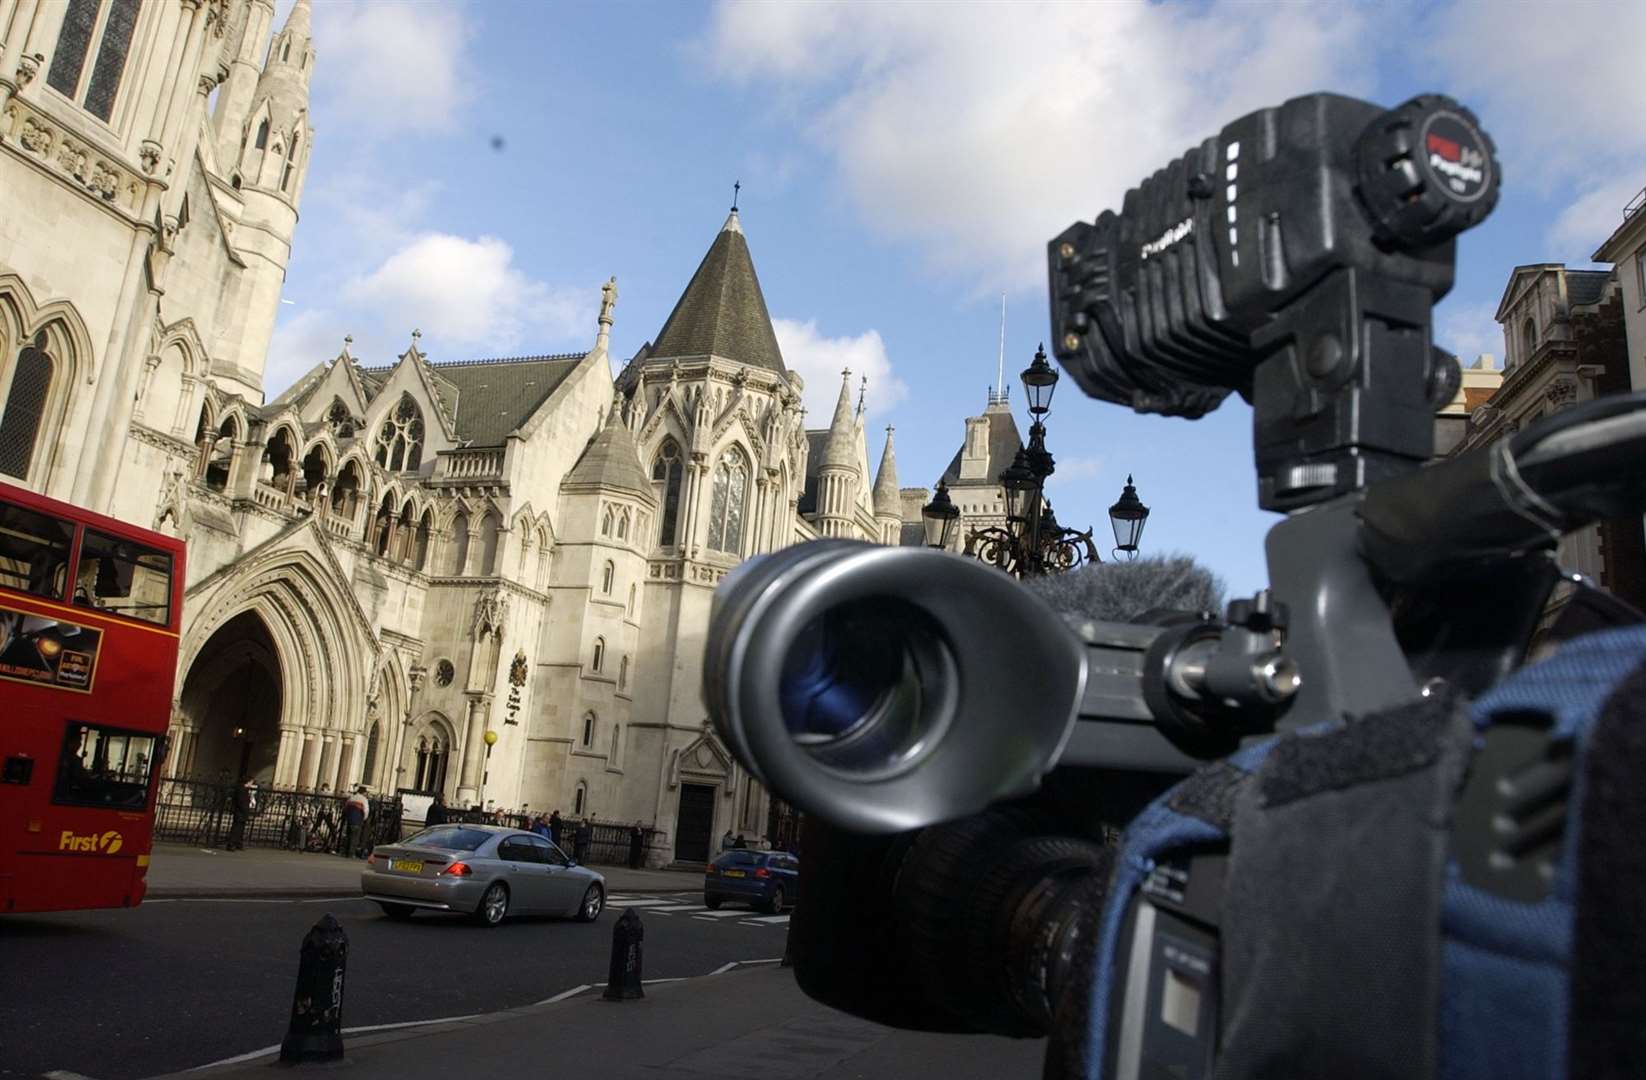 The media gathered outside the Royal Courts of Justice, London, in 2005